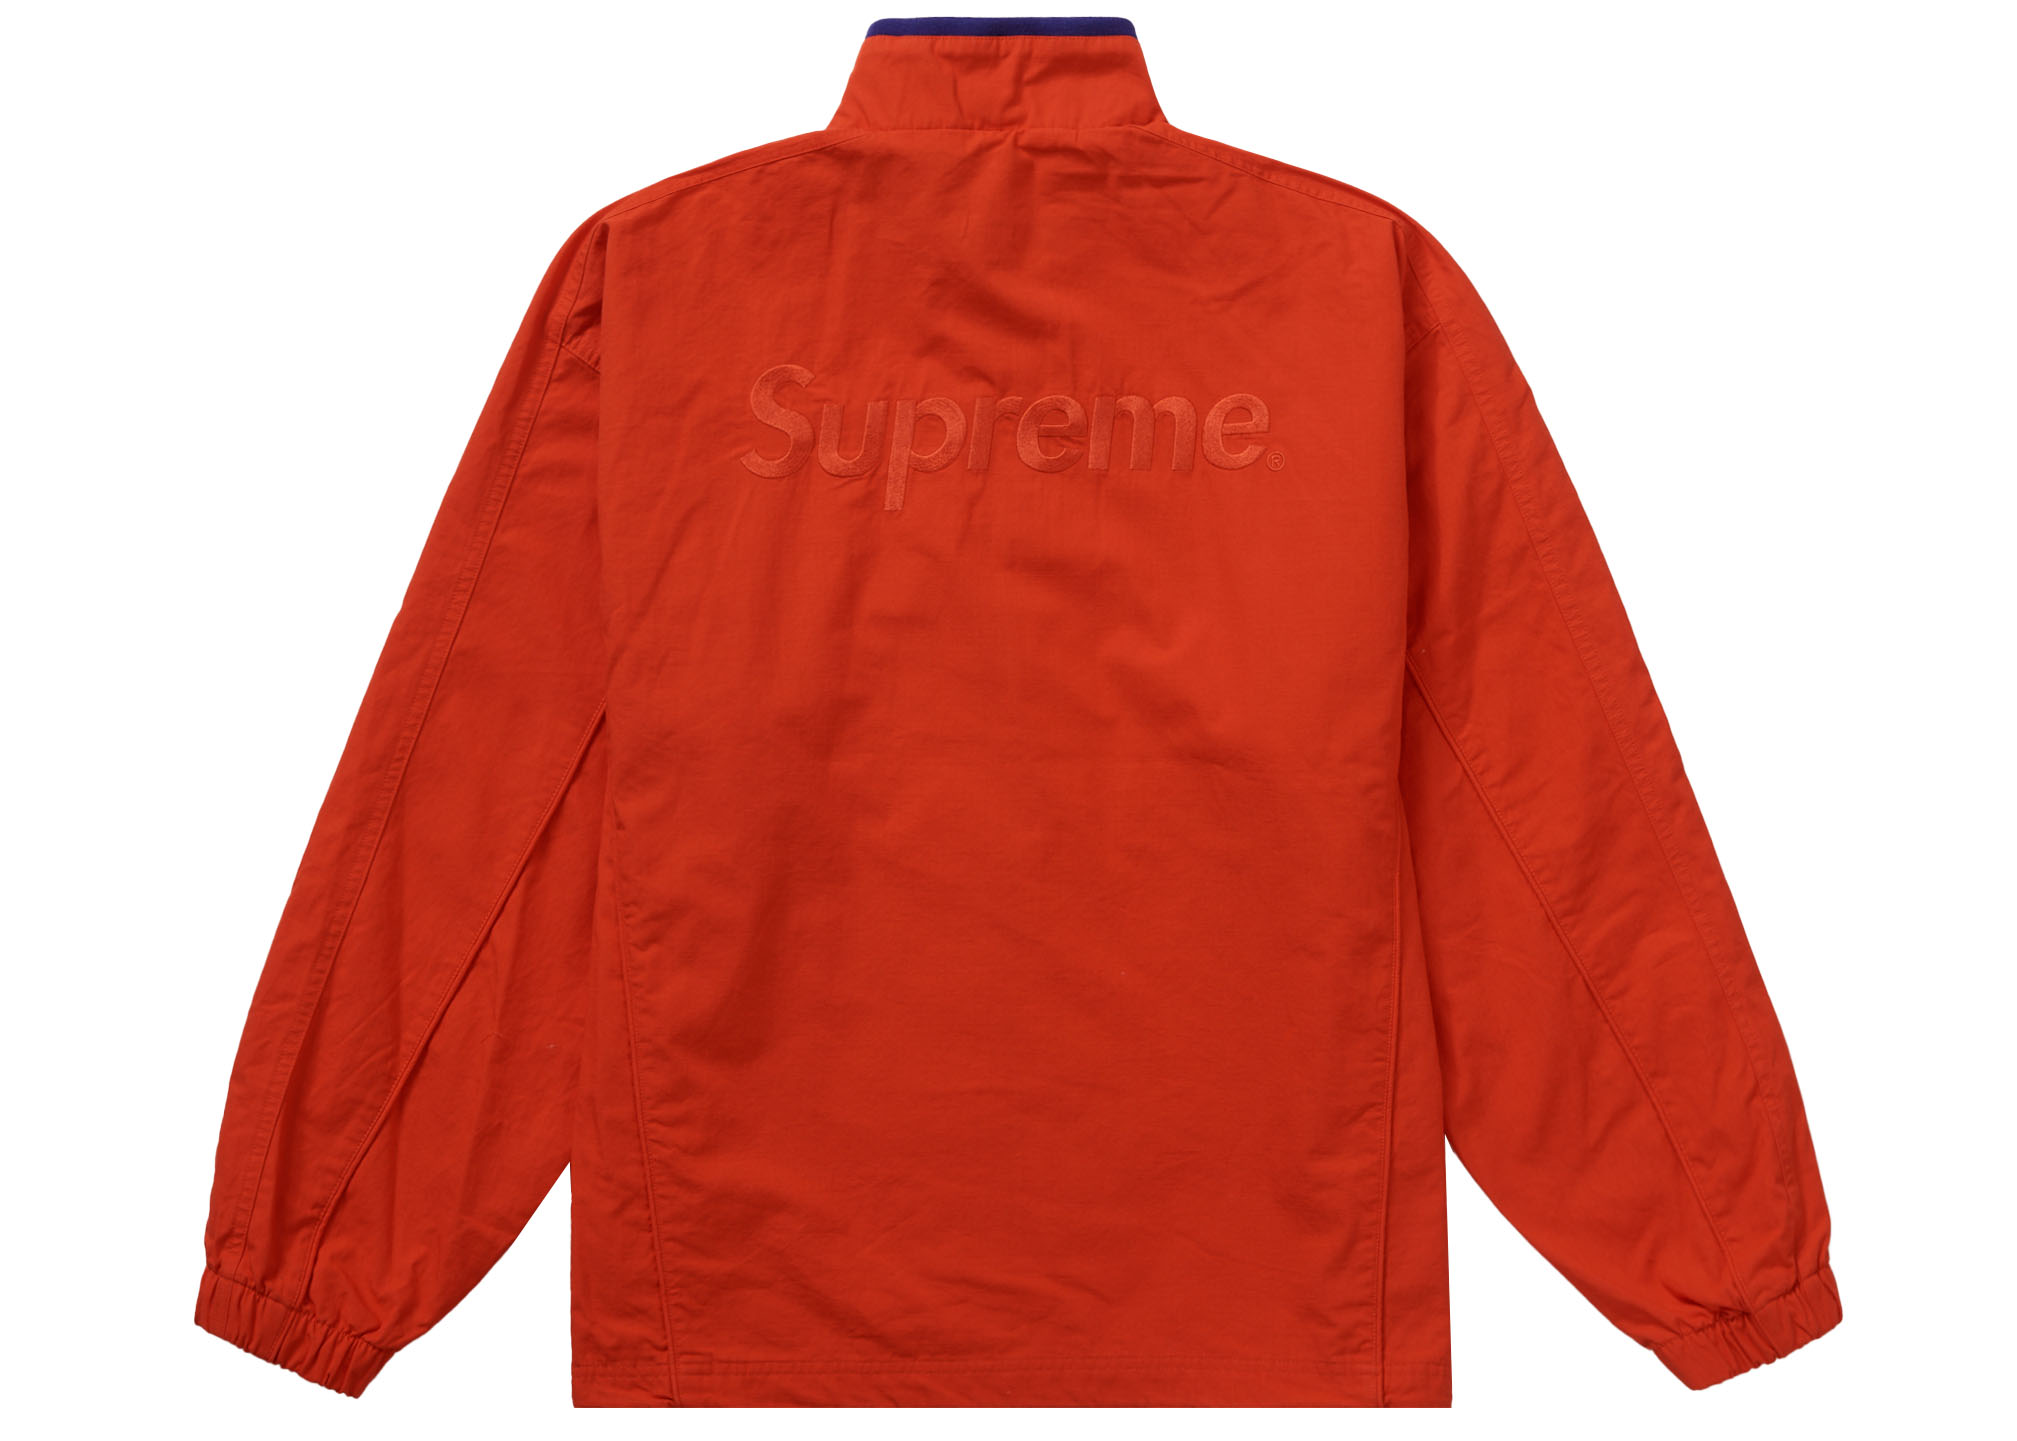 Supreme Umbro Cotton Ripstop Track Jacket Red